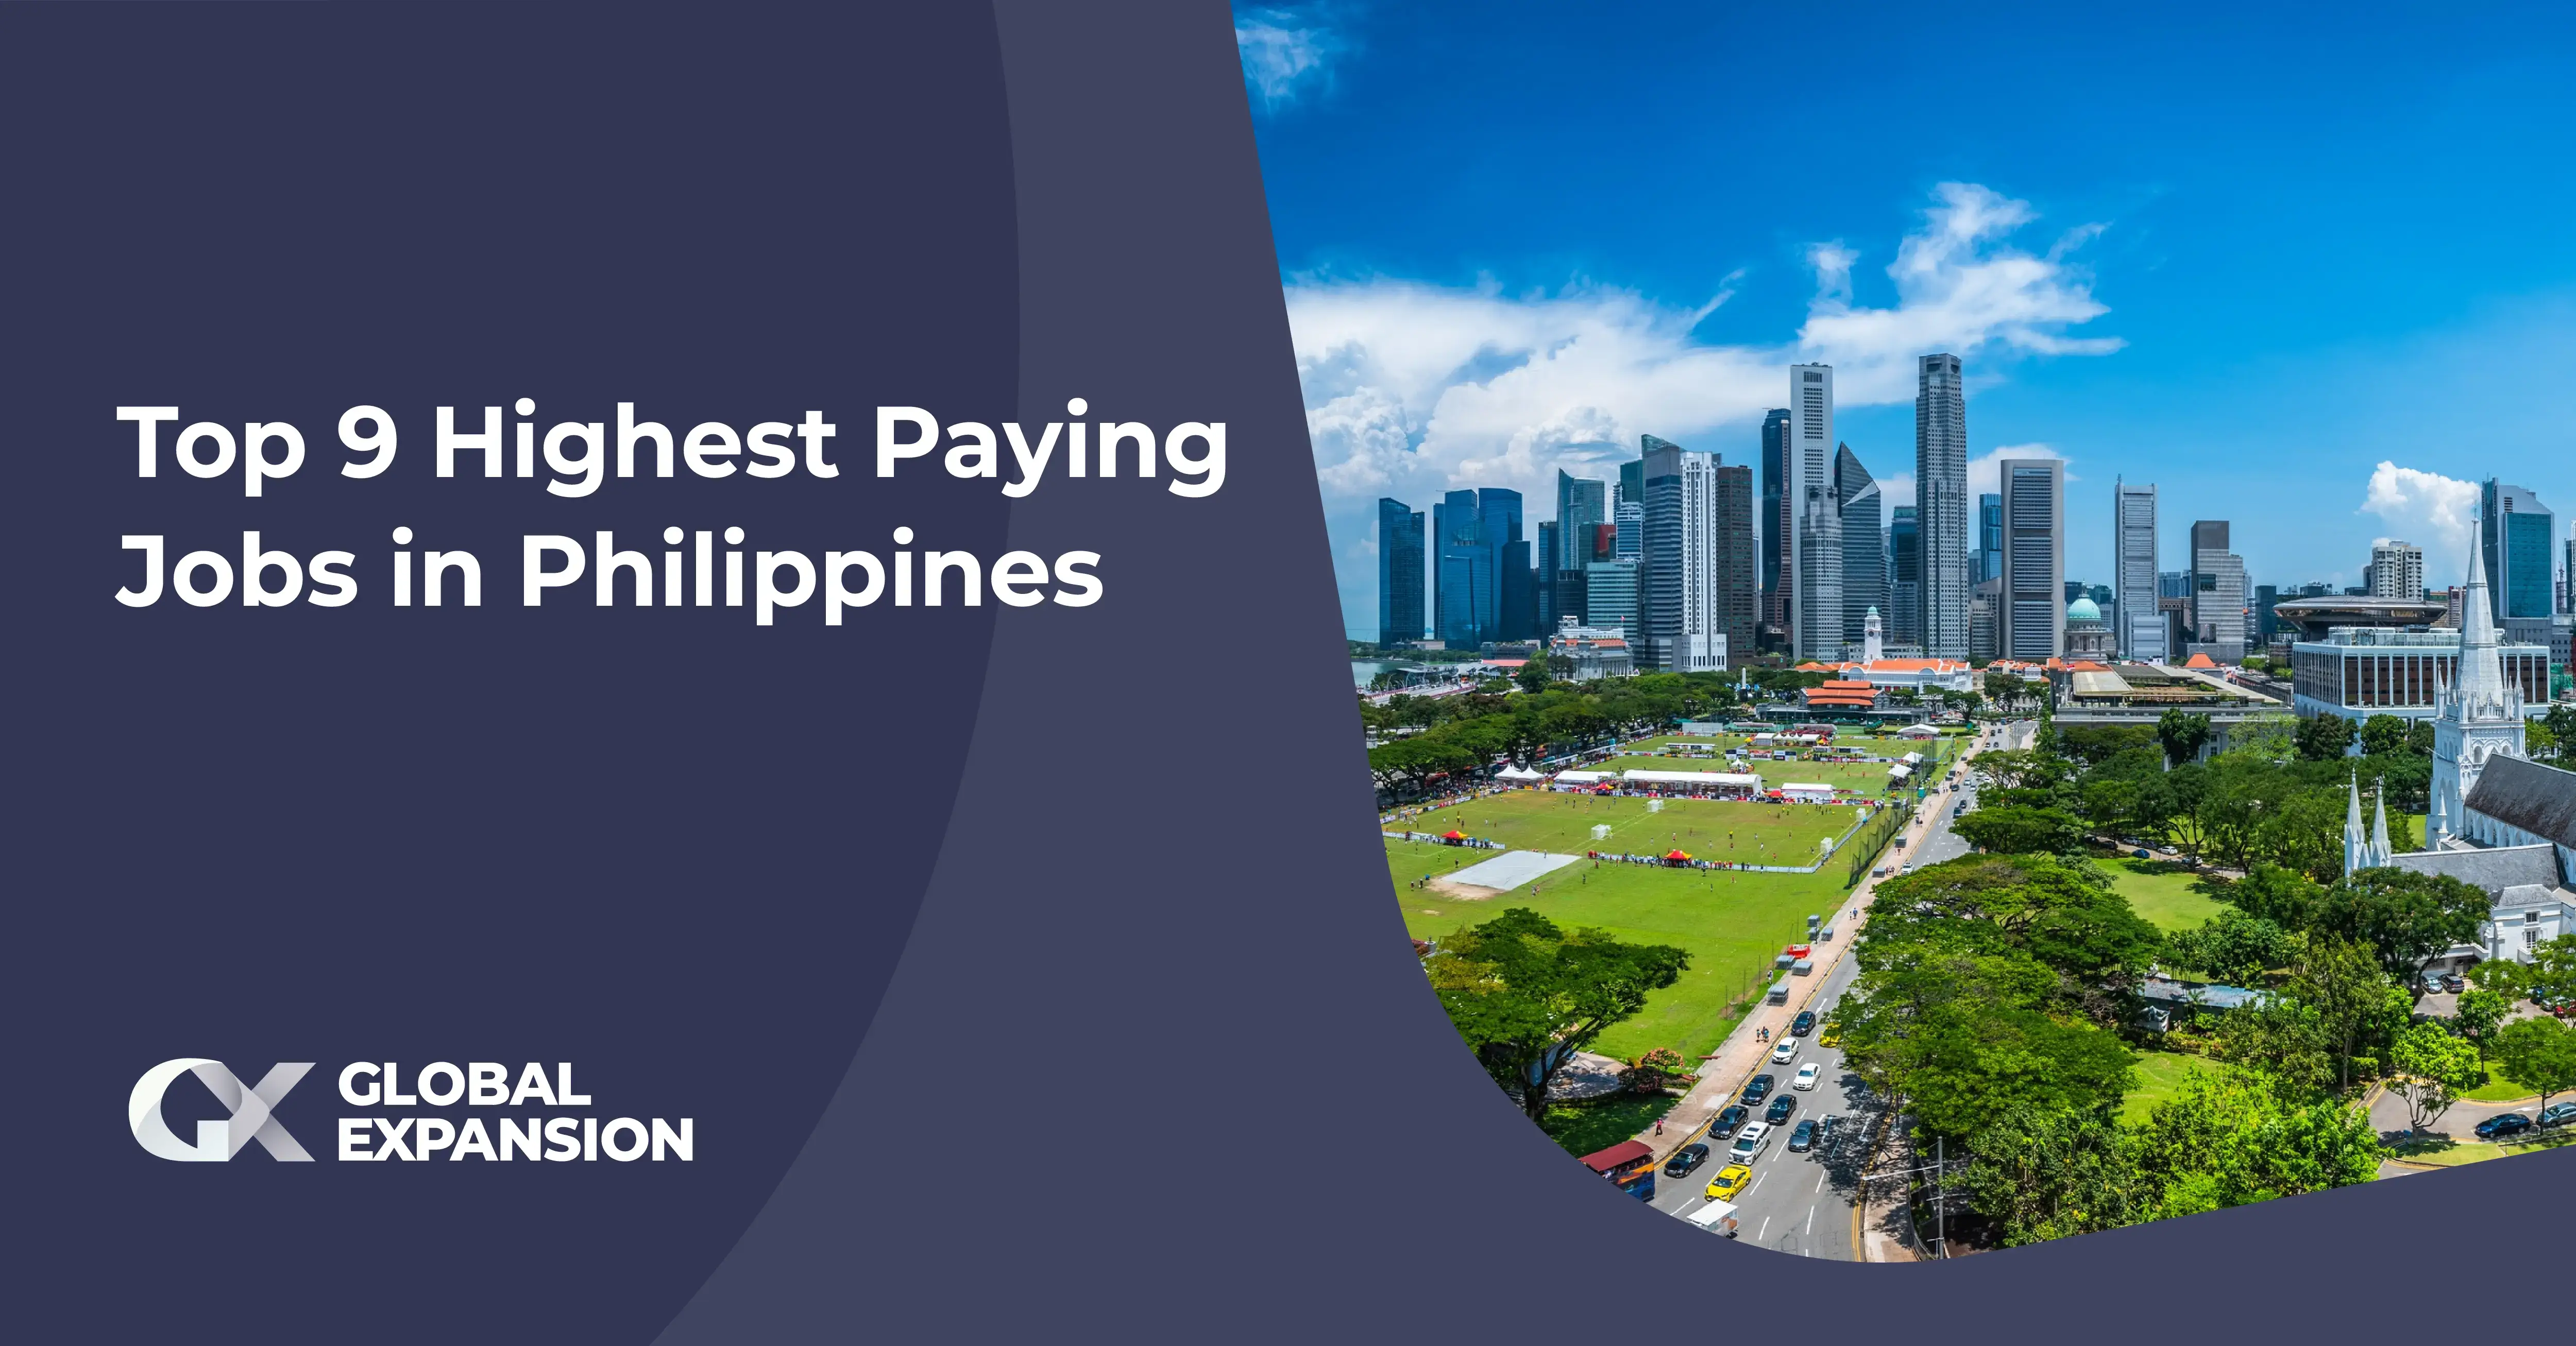 Top 9 Highest Paying Jobs in the Philippines